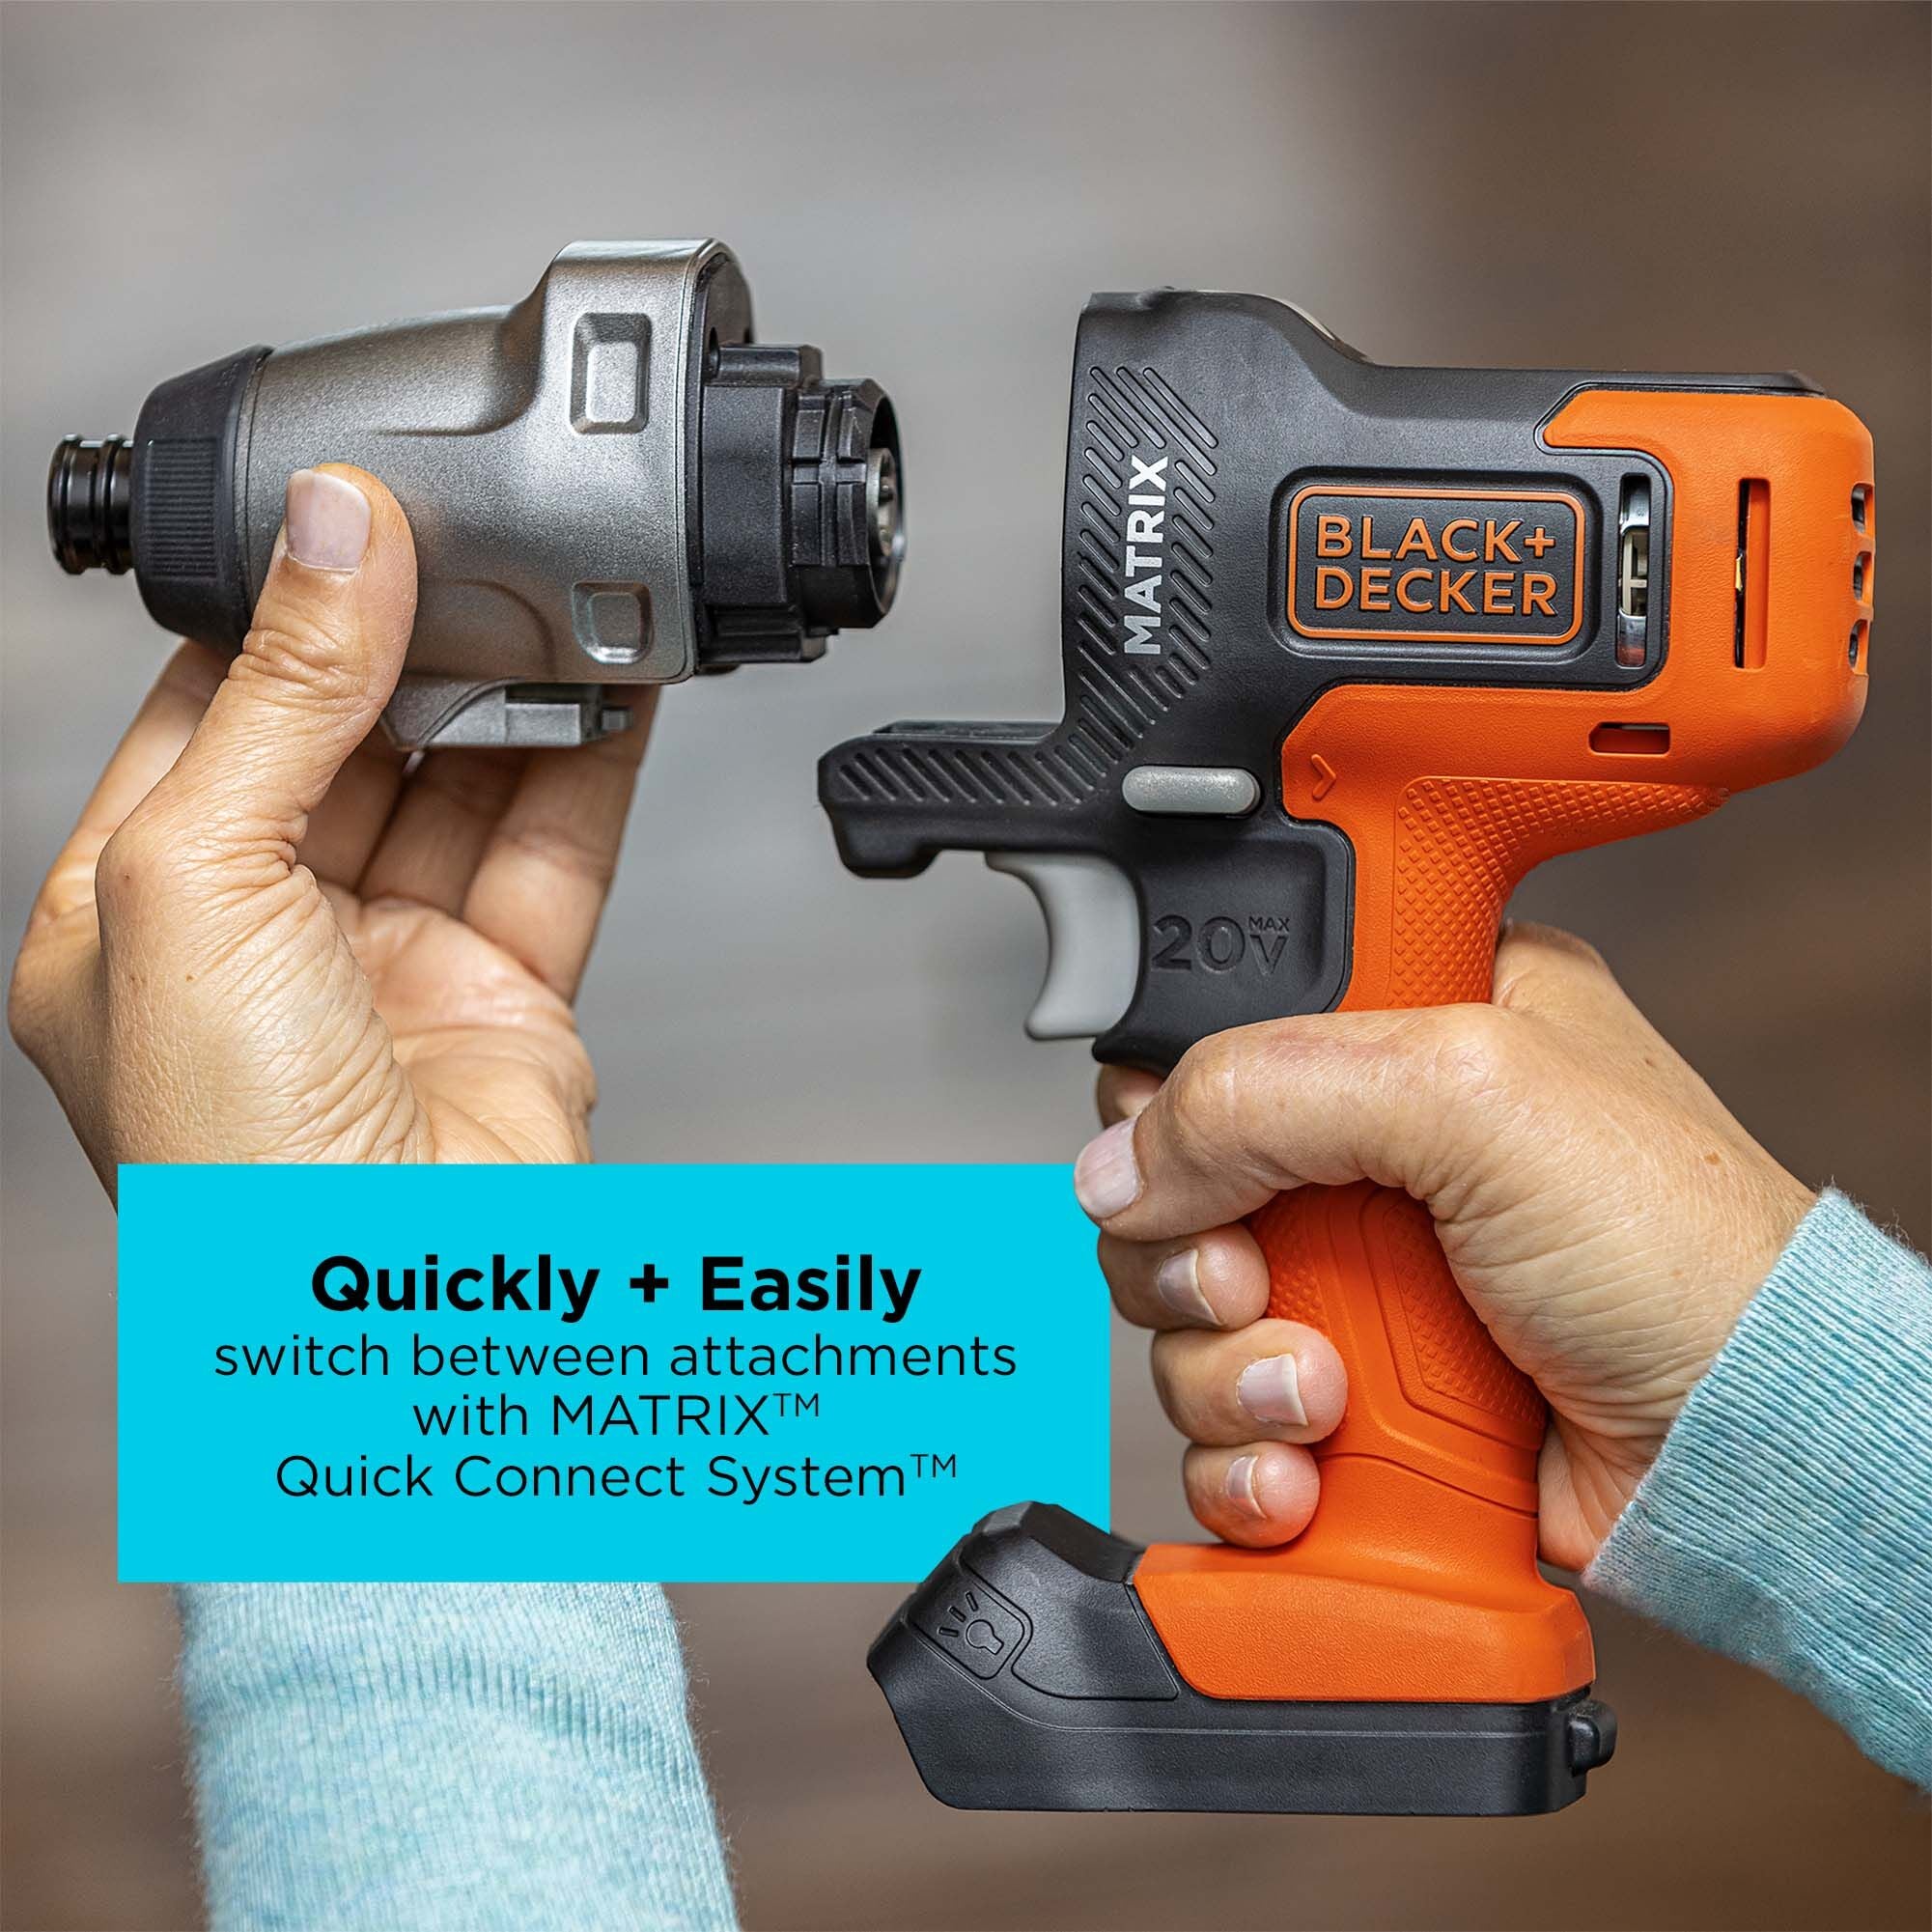 BLACK+DECKER matrix impact drill attachment comes with a storage case that is stackable, portable and easily accessible